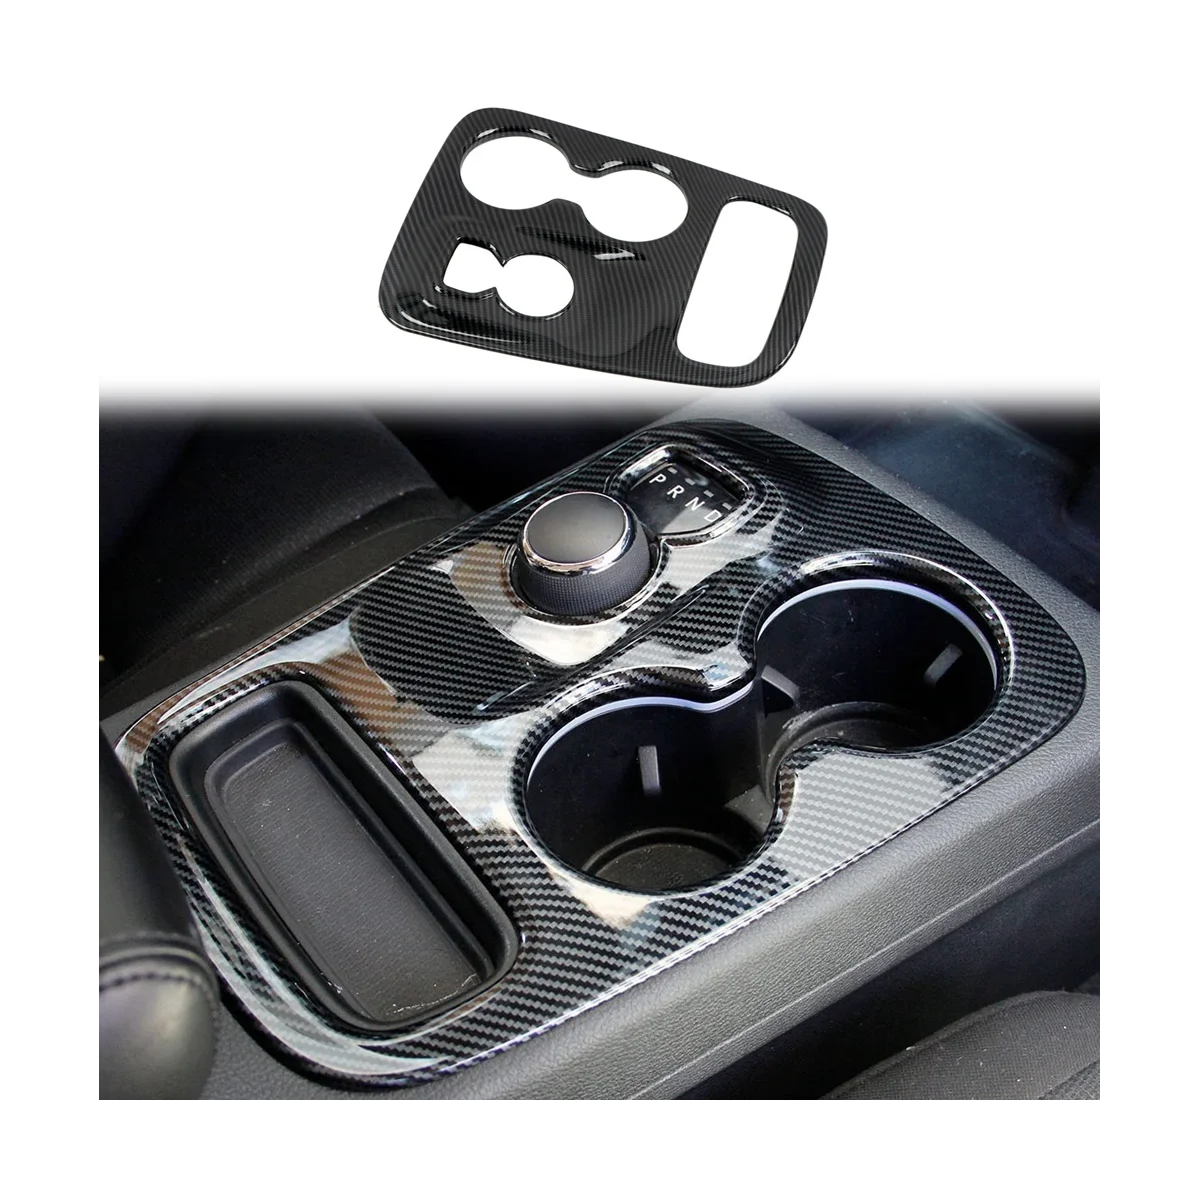 

Car Carbon Fiber Center Console Gear Shift Water Cup Holder Frame Cover Trim Stickers for Dodge Durango 2014-2017